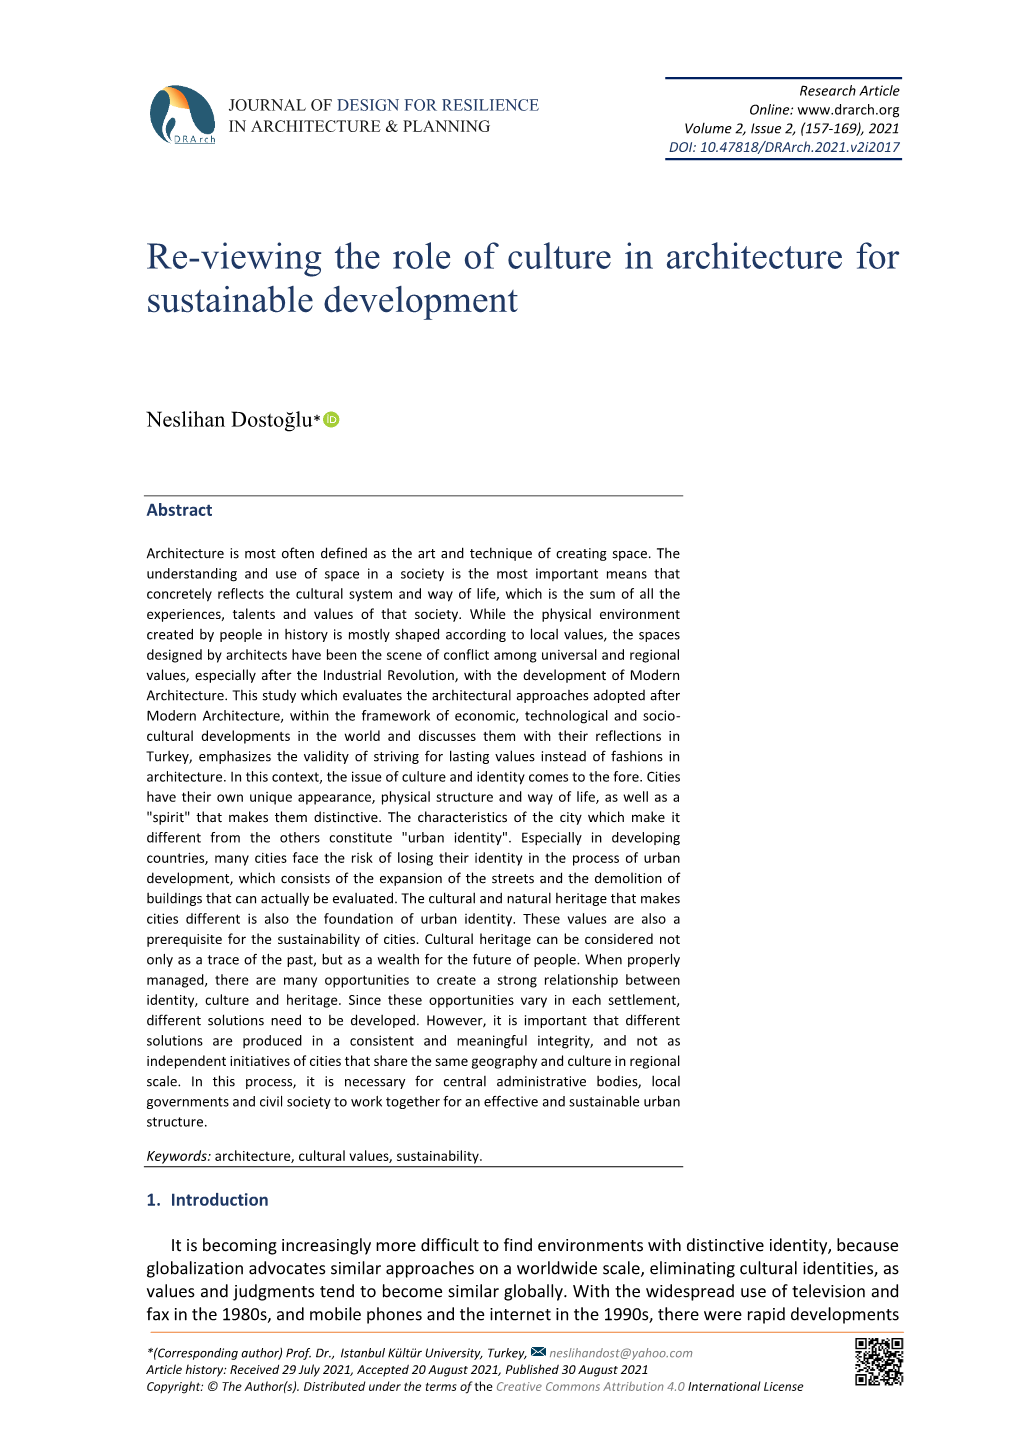 Re-Viewing the Role of Culture in Architecture for Sustainable Development